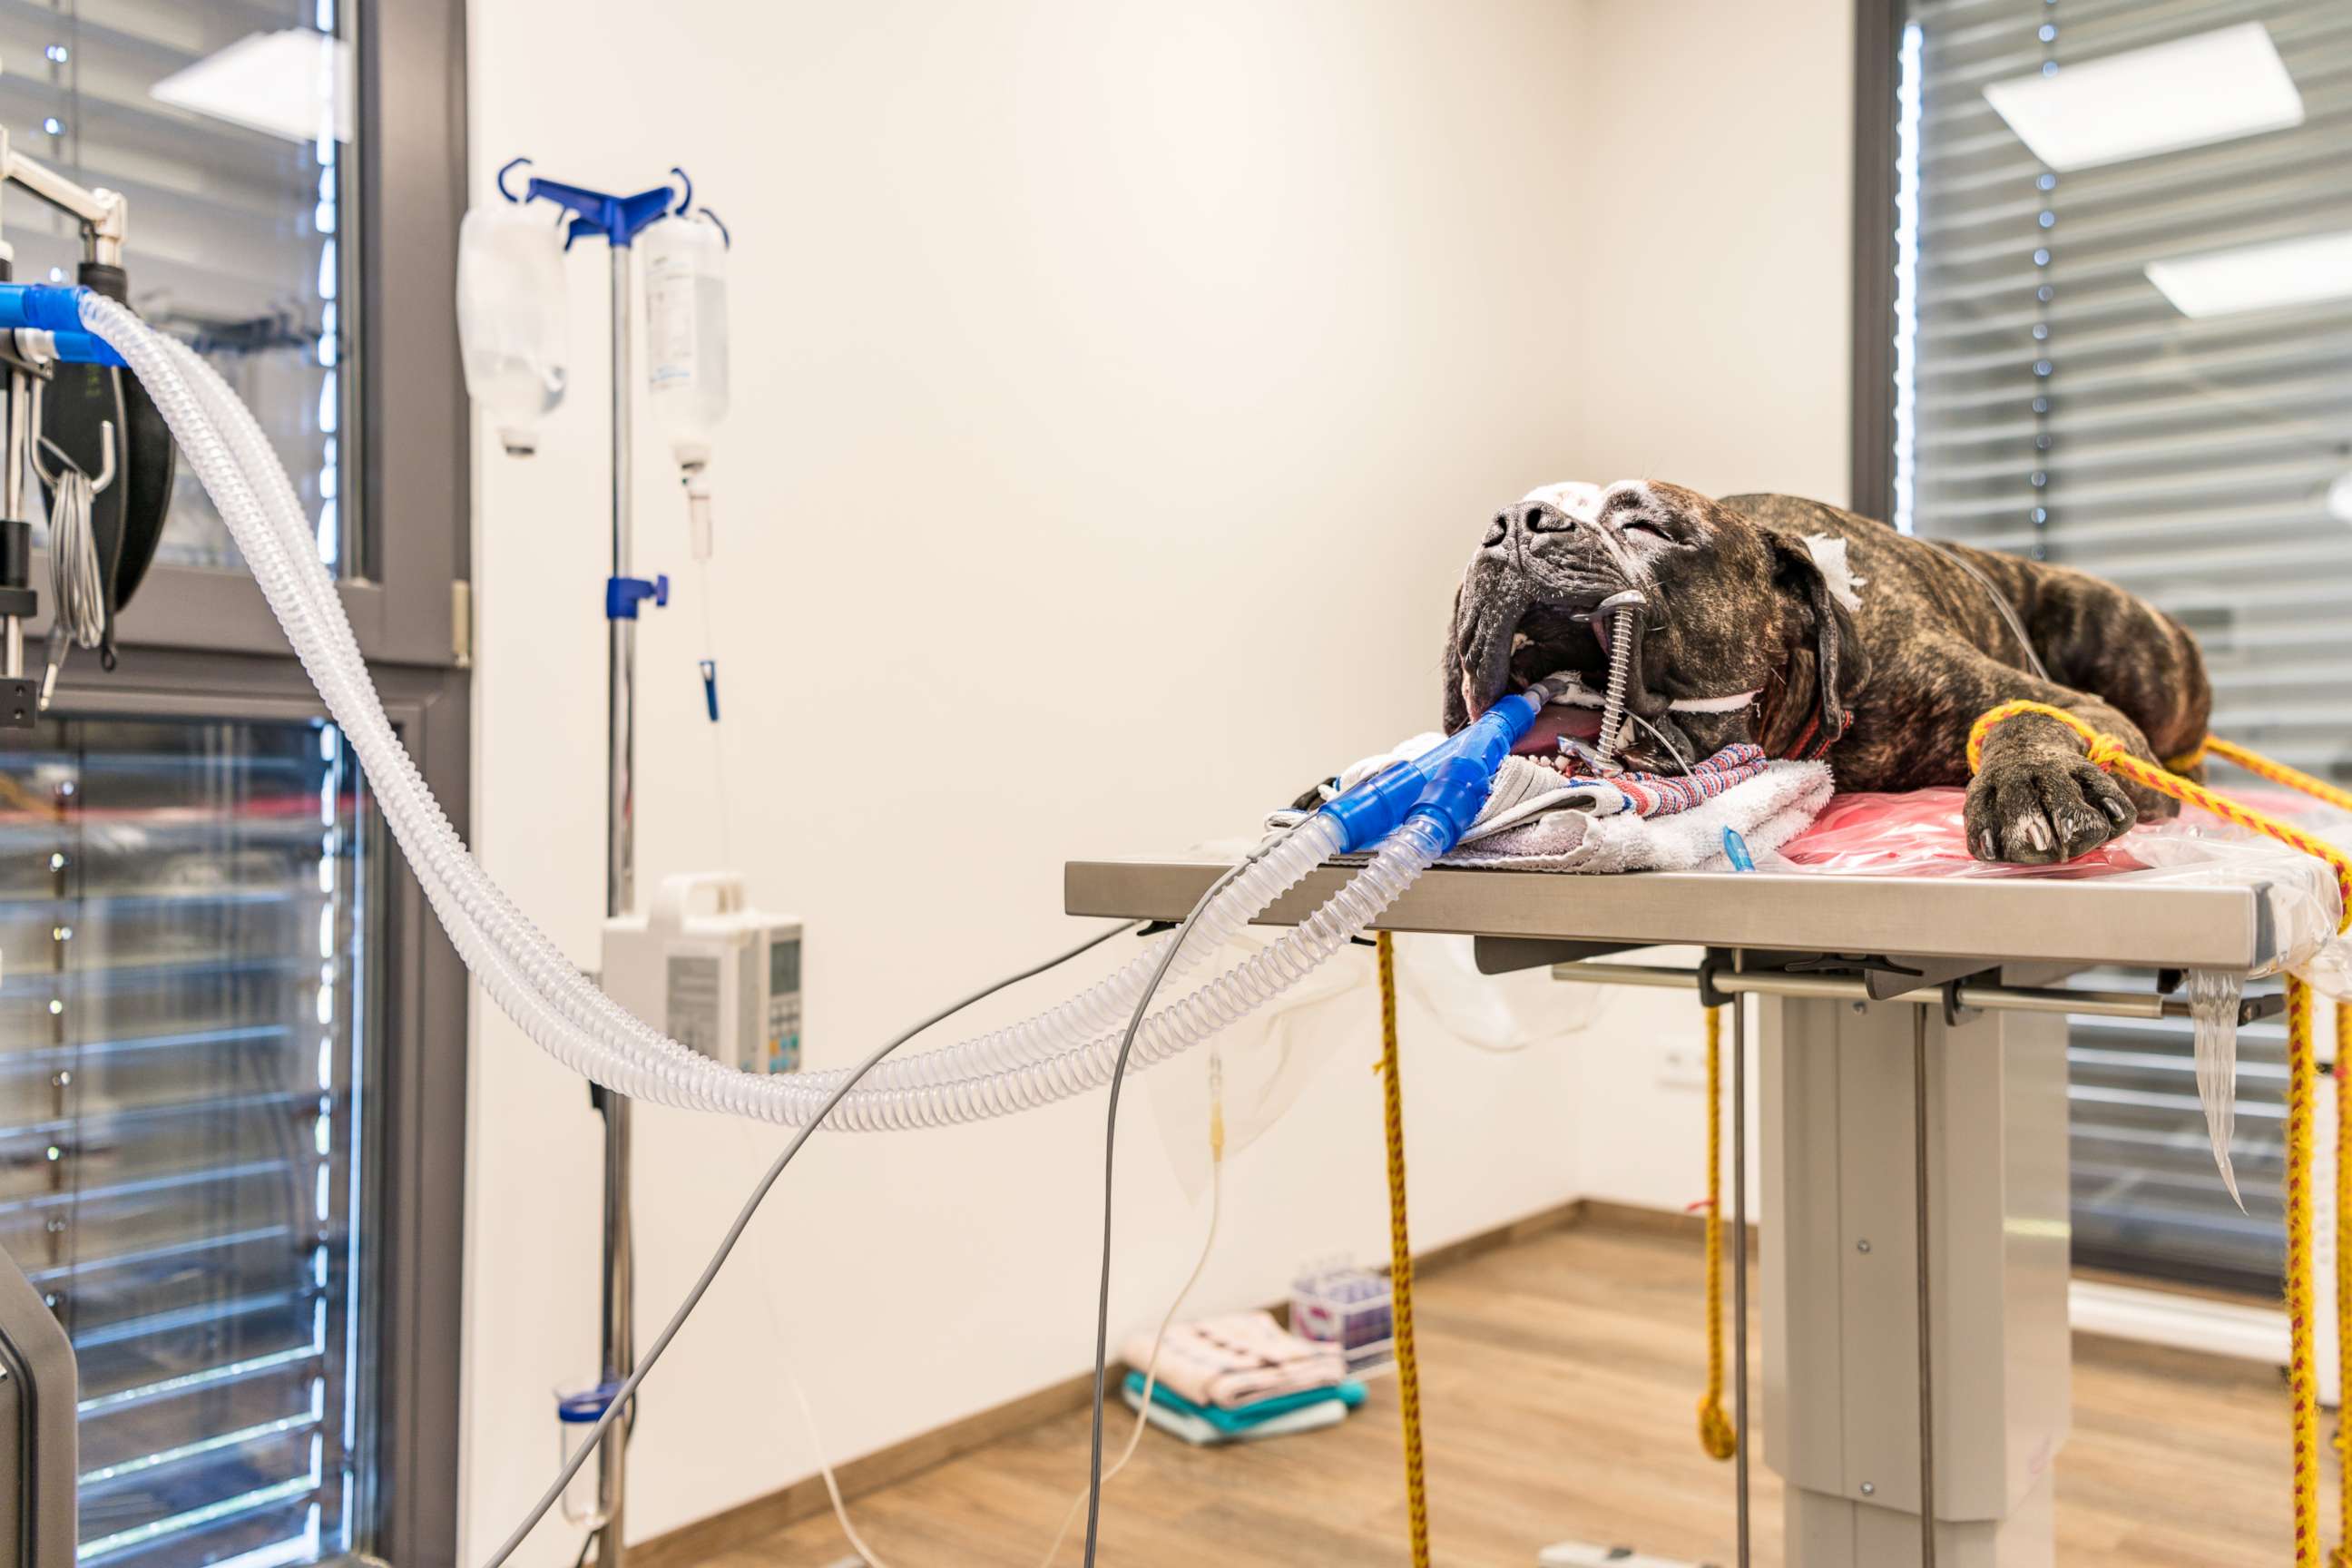 PHOTO: A dog is intubated in surgery room of veterinary clinic in this stock photo.